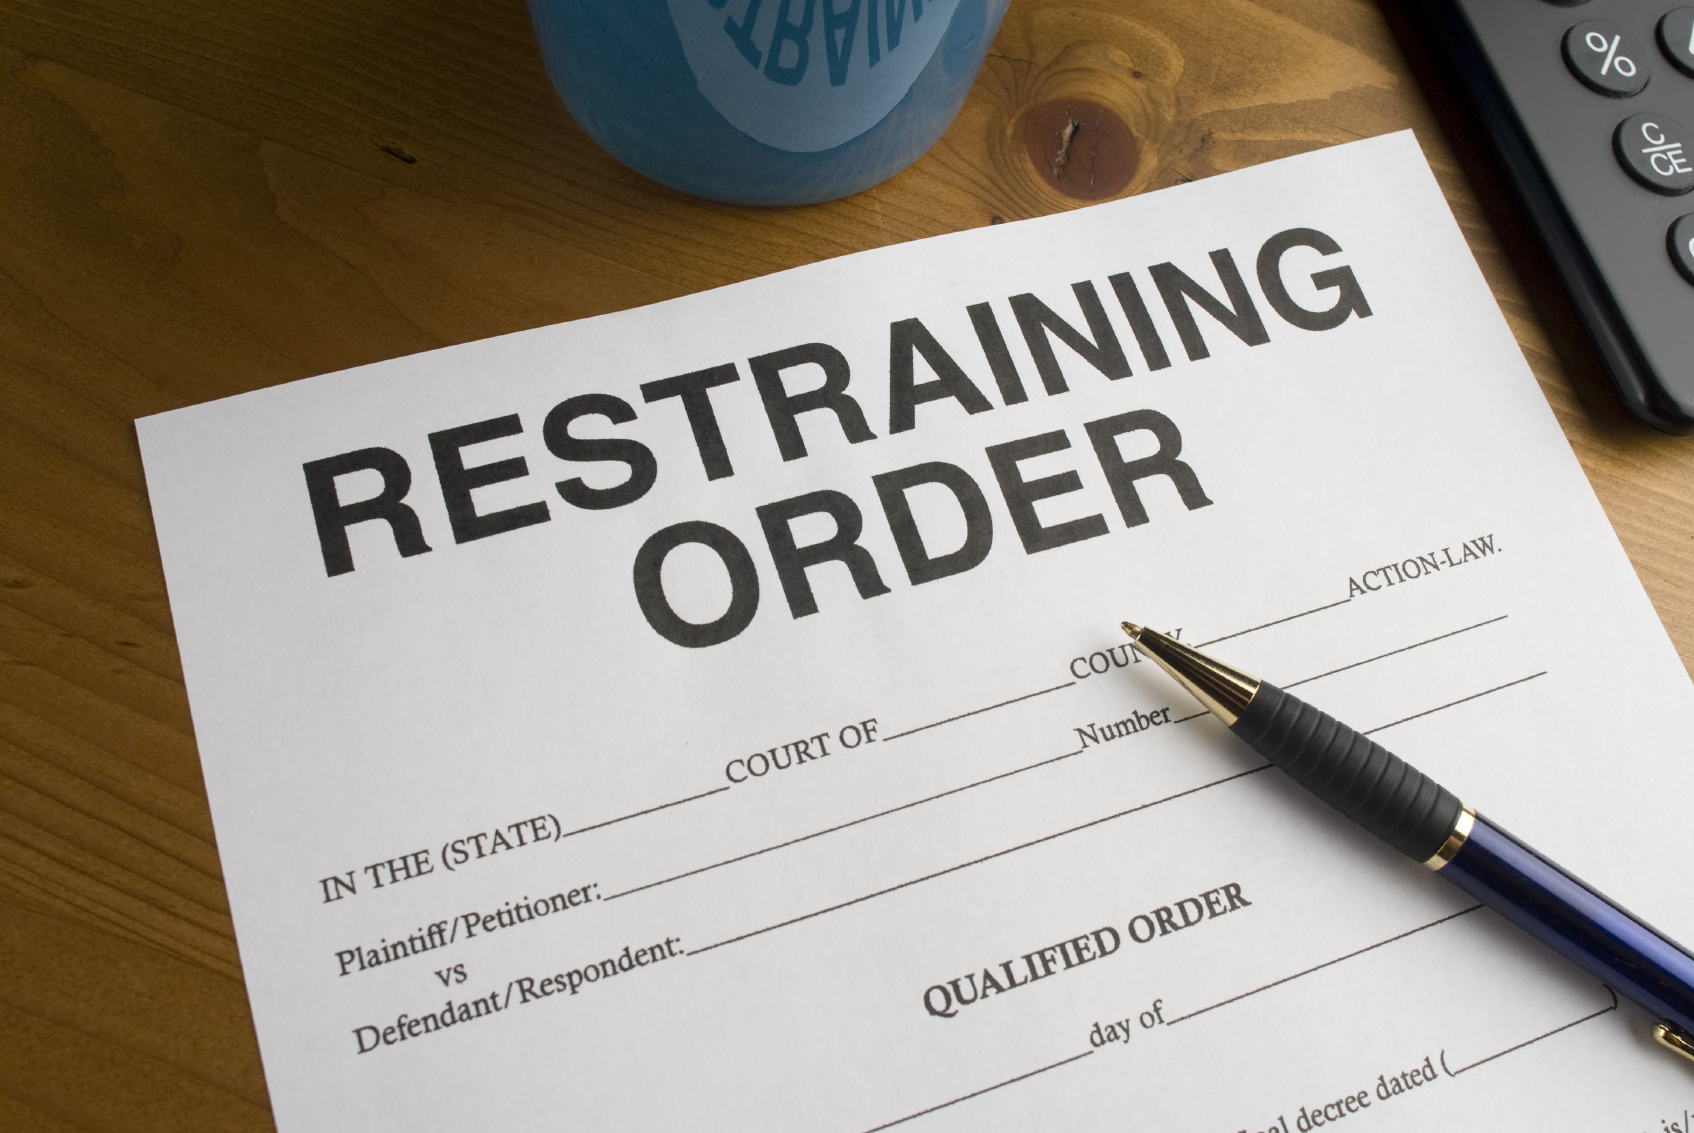 What Criteria Must Be Met In New Jersey In Order To Get A Restraining Order?